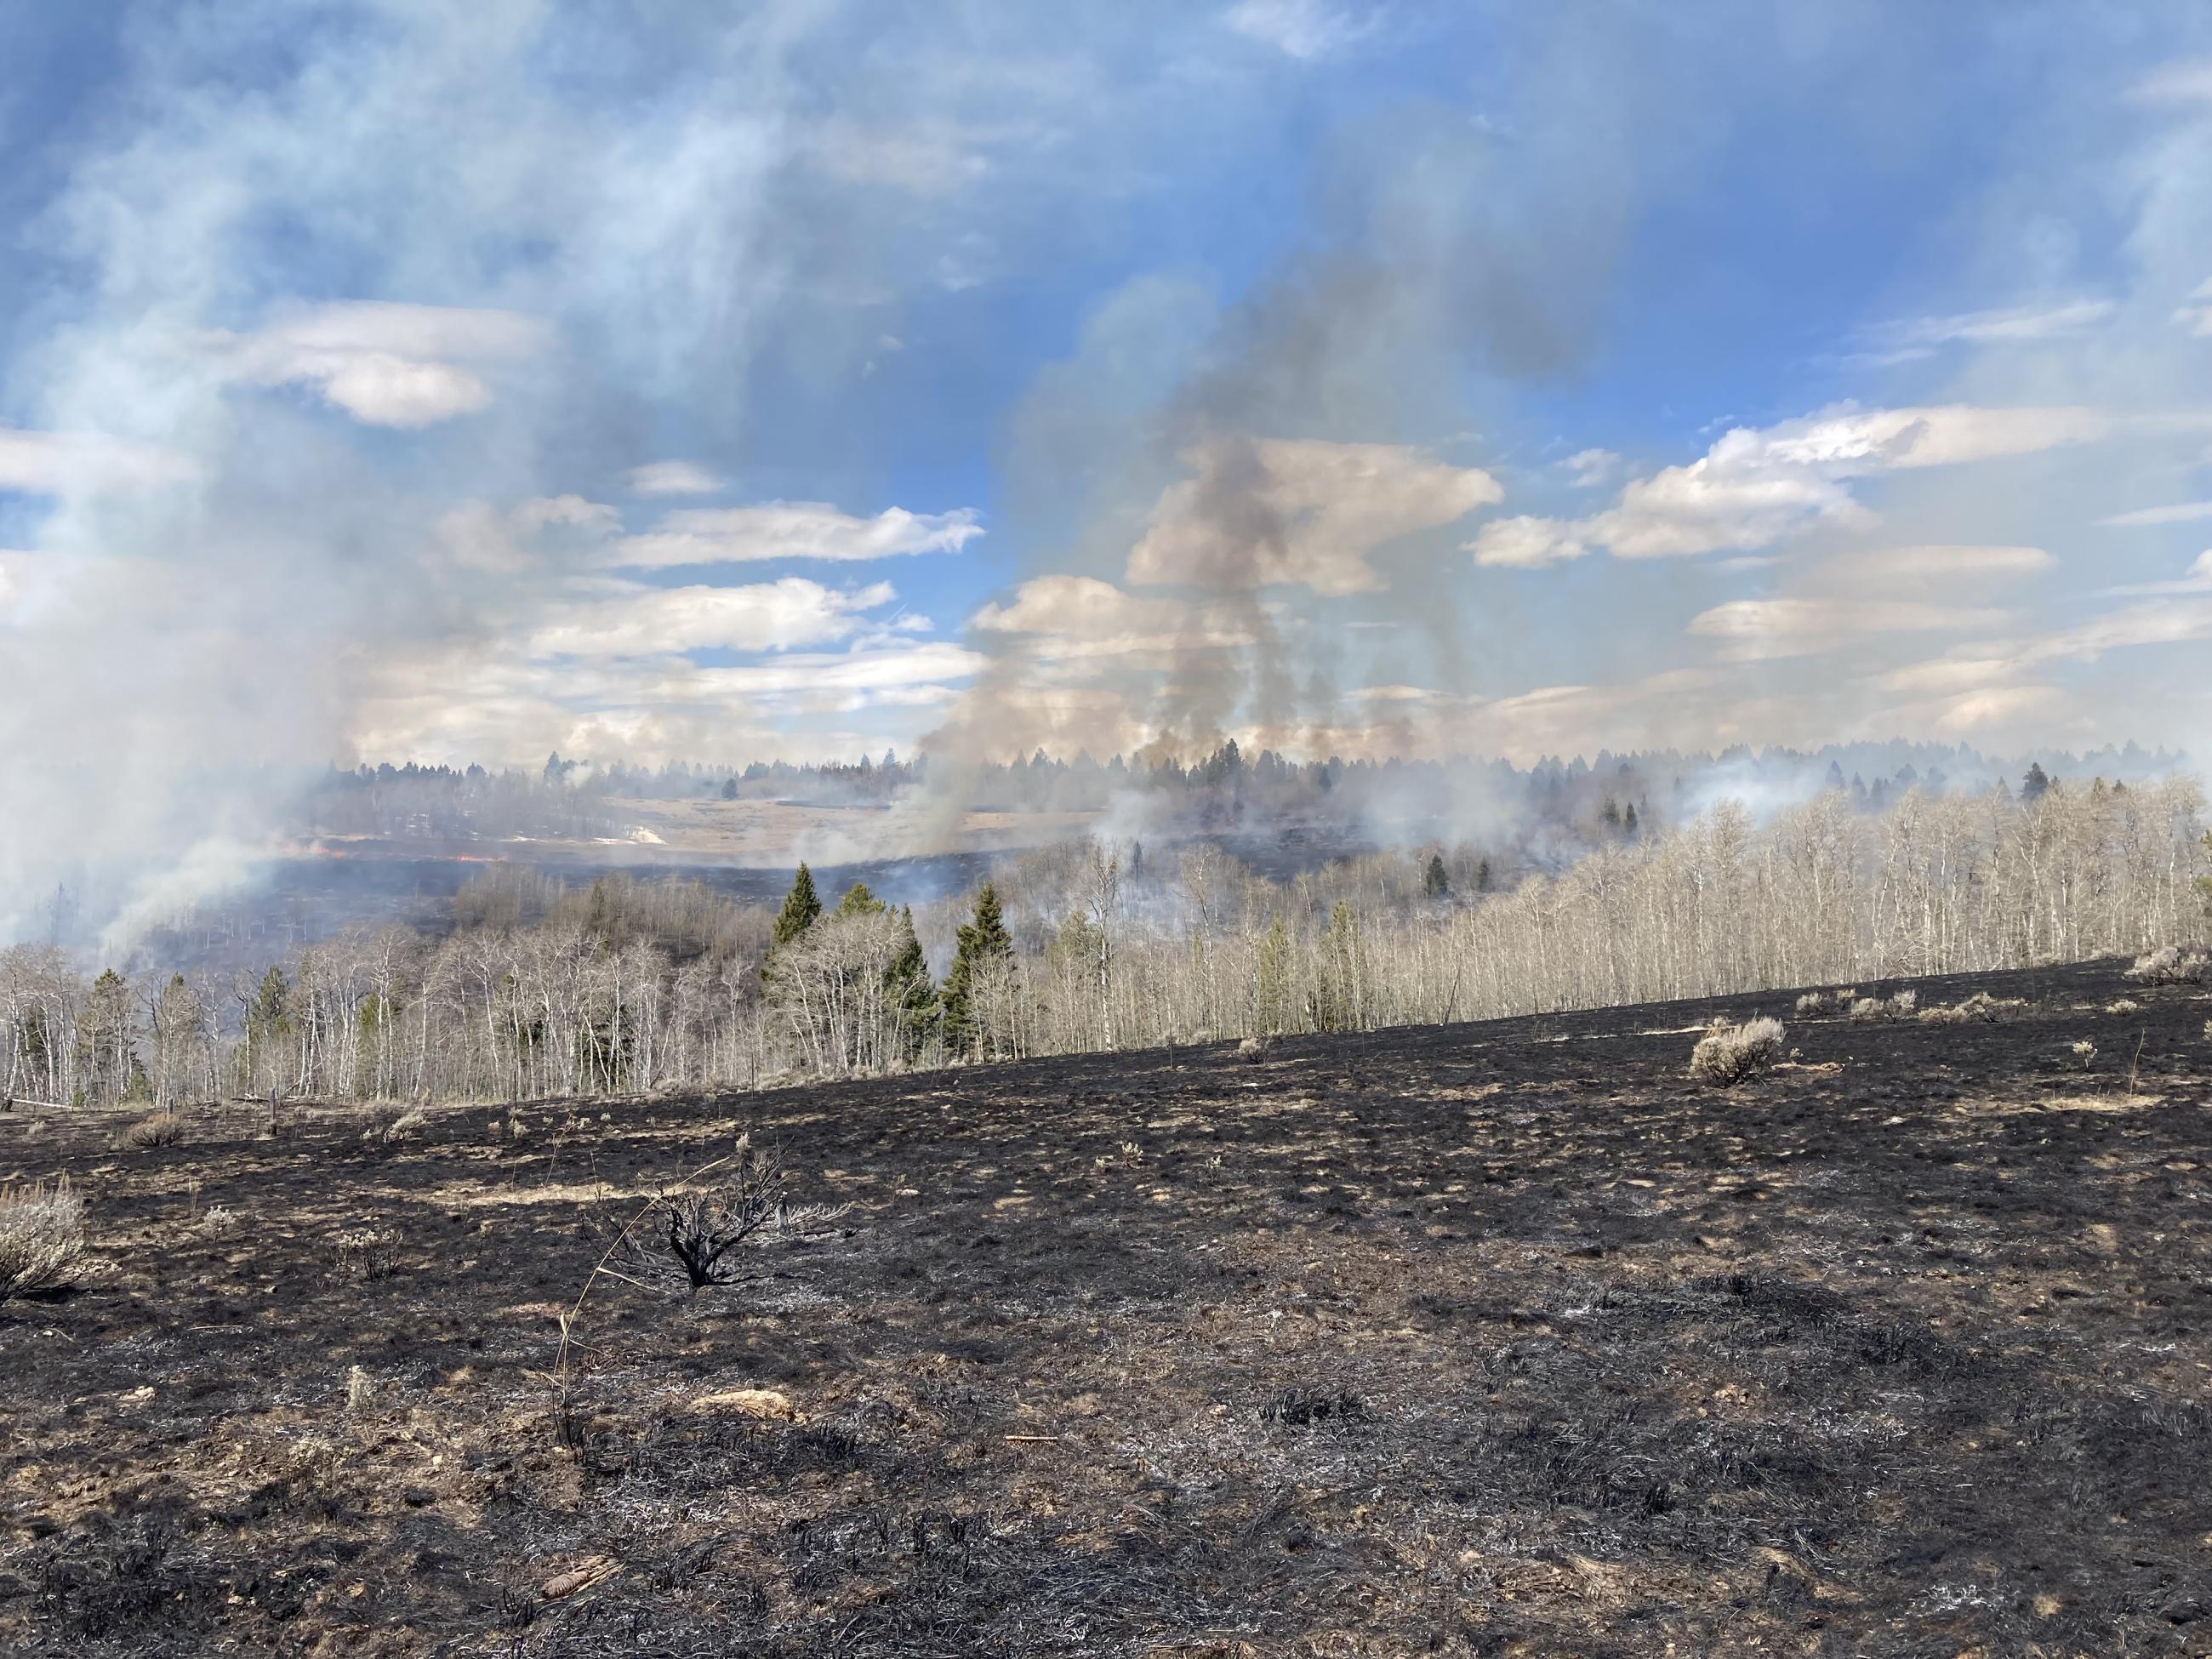 Picture showing the landscape after the ground fire went through, removing ground fuels and leaving trees intact.